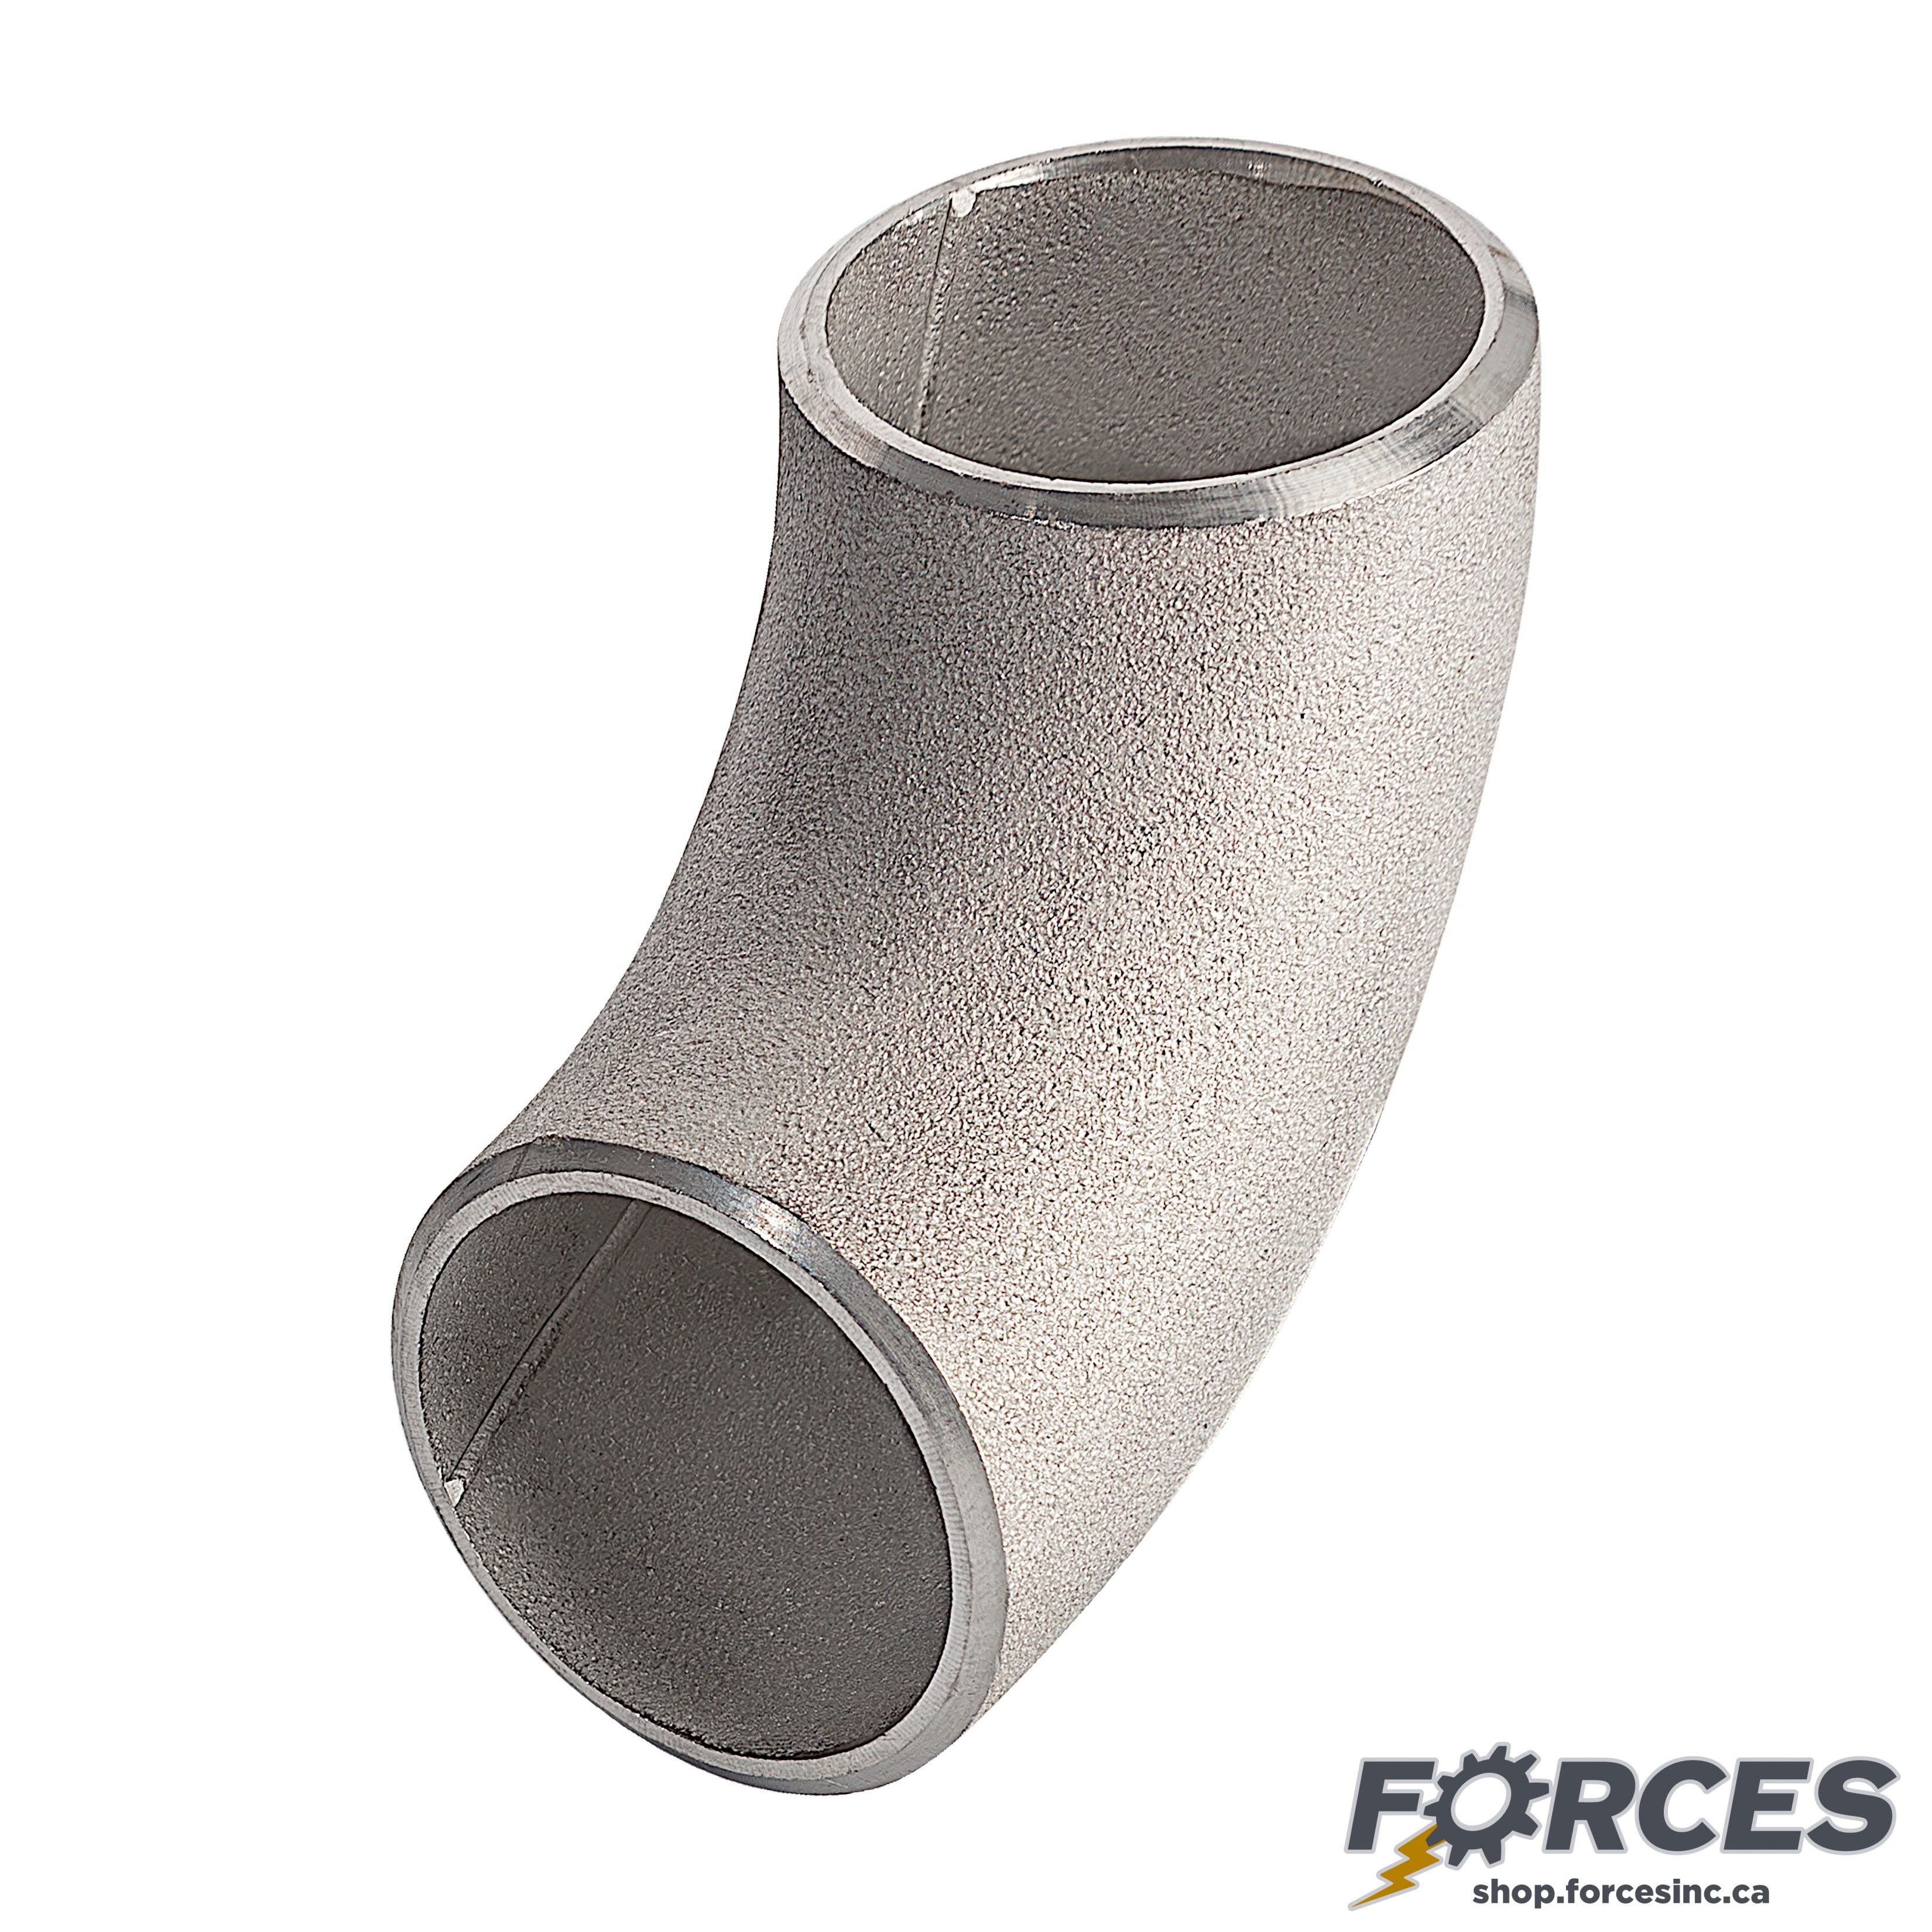 1/2" Elbow 90° SCH 40 Butt Weld - Stainless Steel 304 - Forces Inc